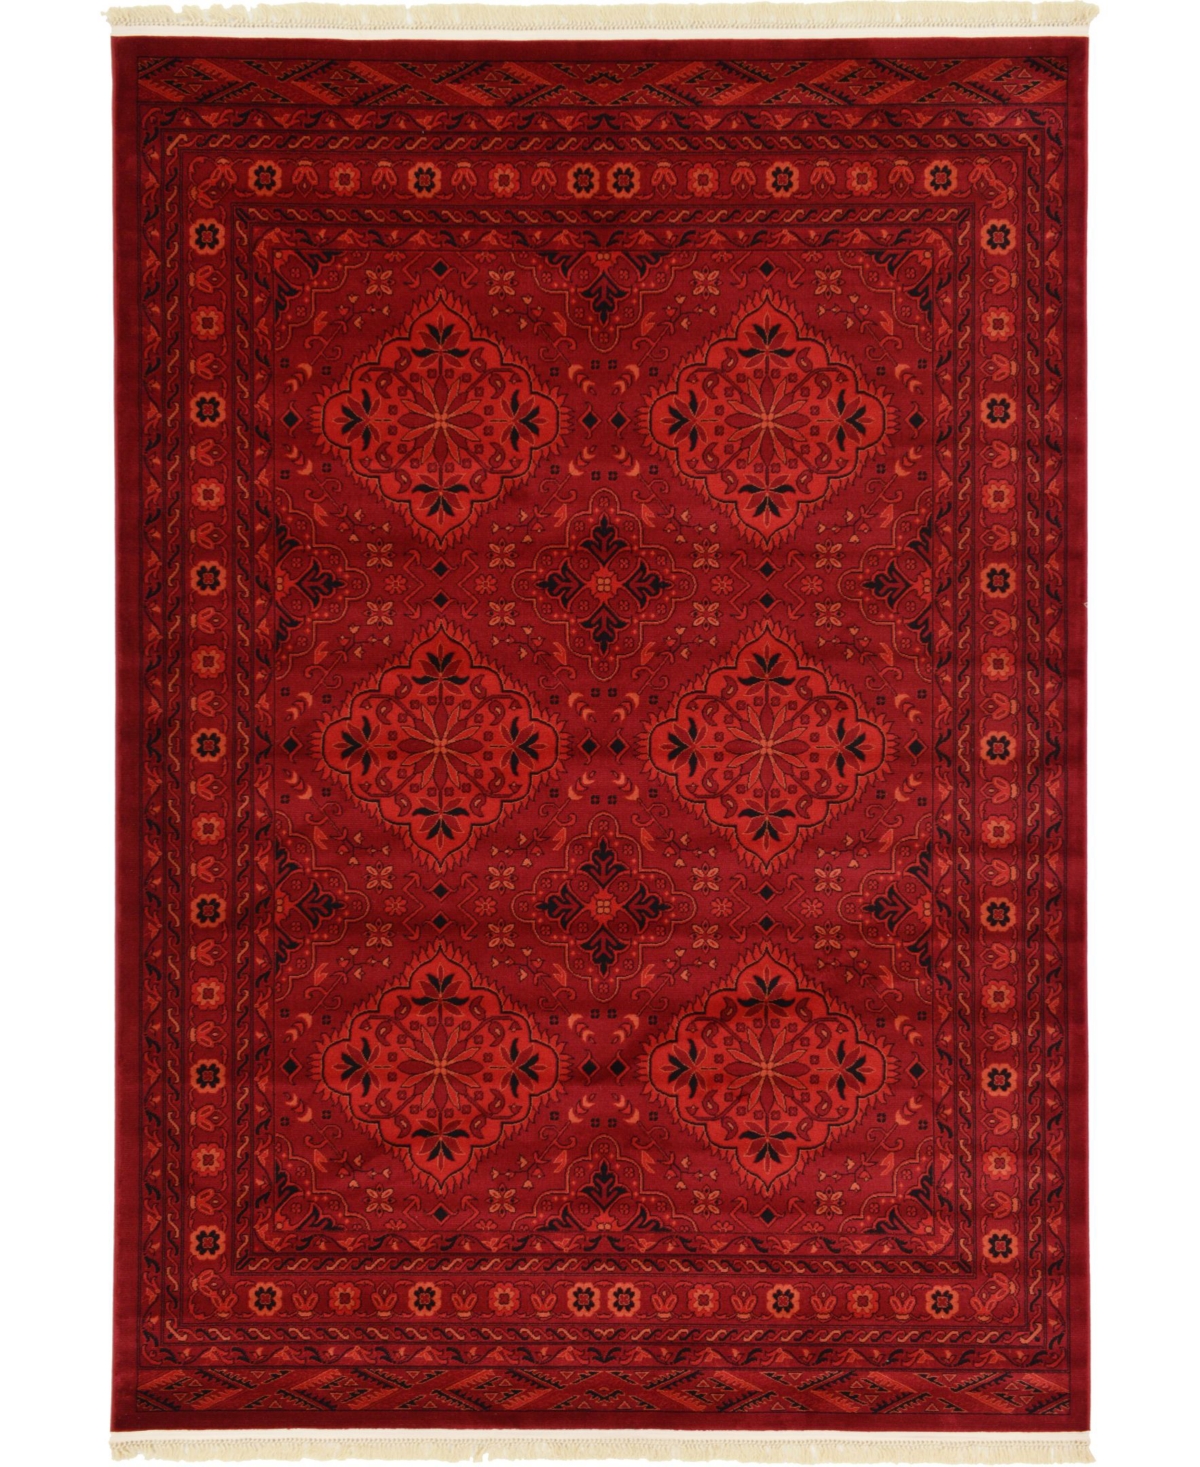 Bayshore Home Vivaan Viv1 Red 7' x 10' Area Rug - Red